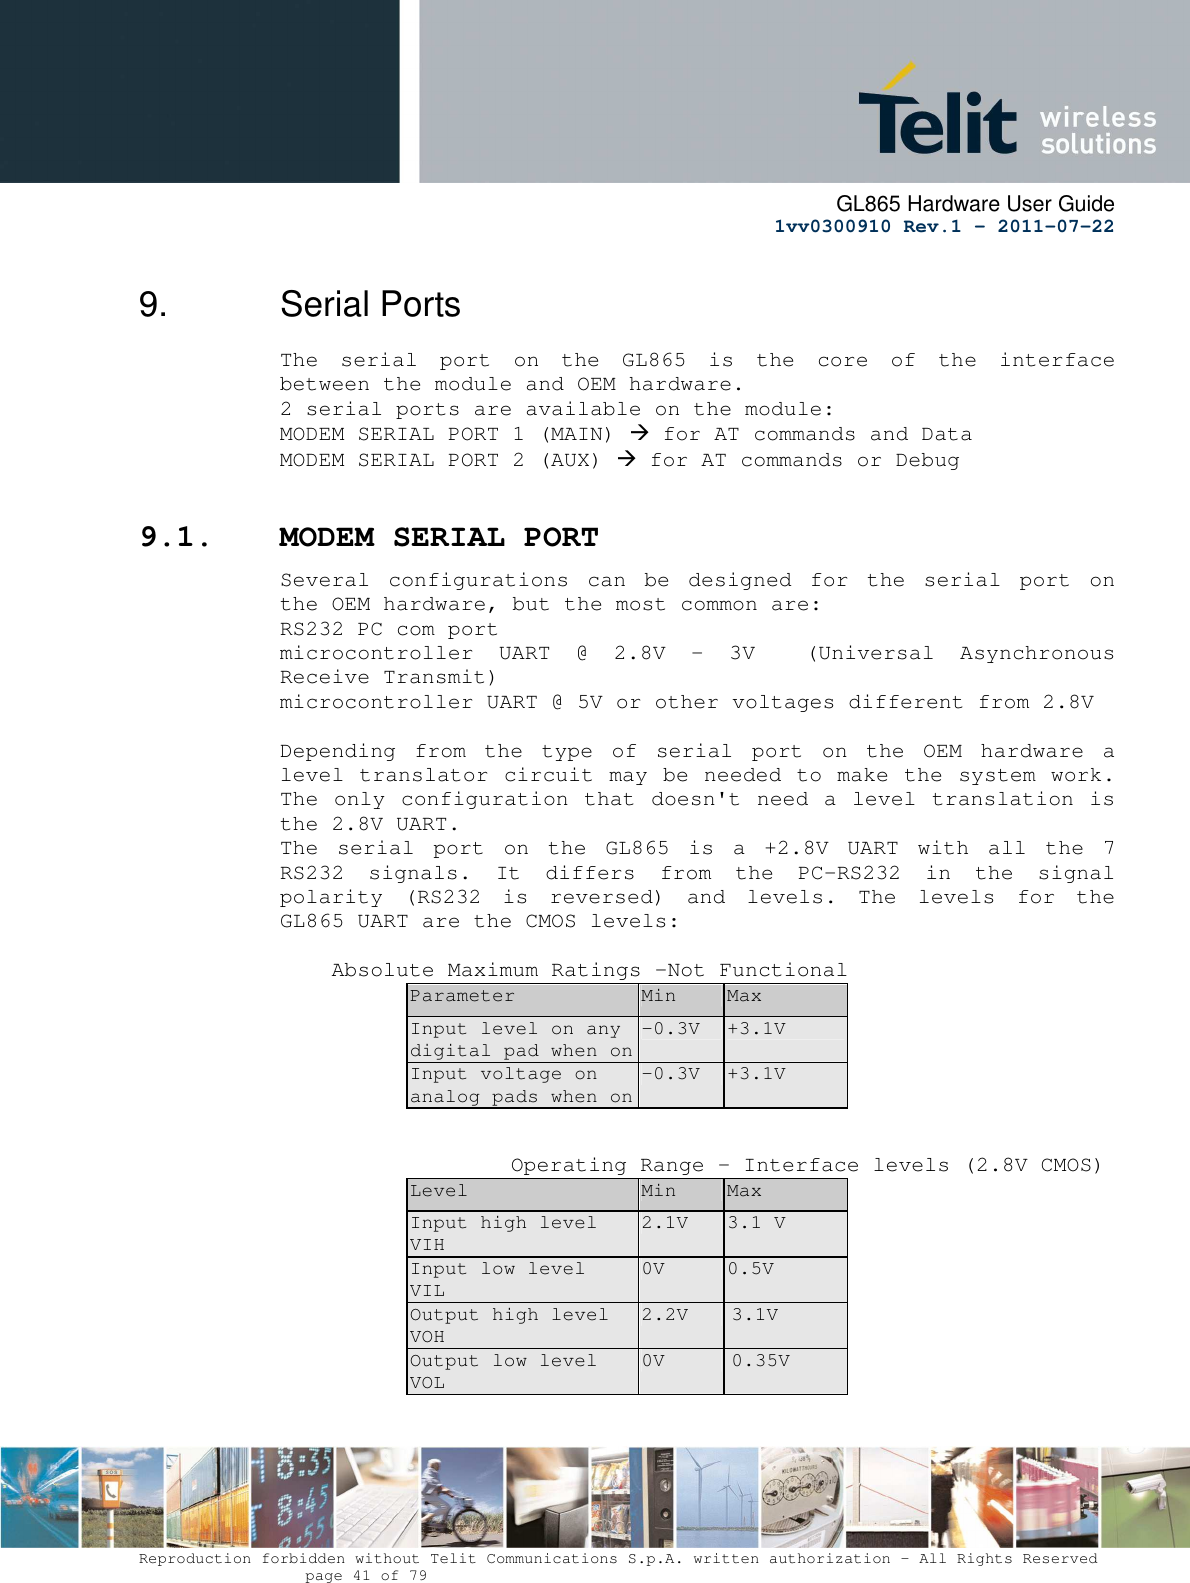      GL865 Hardware User Guide     1vv0300910 Rev.1 – 2011-07-22       Reproduction forbidden without Telit Communications S.p.A. written authorization - All Rights Reserved    page 41 of 79  9.  Serial Ports The  serial  port  on  the  GL865  is  the  core  of  the  interface between the module and OEM hardware.  2 serial ports are available on the module: MODEM SERIAL PORT 1 (MAIN)  for AT commands and Data MODEM SERIAL PORT 2 (AUX)  for AT commands or Debug   9.1. MODEM SERIAL PORT Several  configurations  can  be  designed  for  the  serial  port  on the OEM hardware, but the most common are: RS232 PC com port microcontroller  UART  @  2.8V  -  3V    (Universal  Asynchronous Receive Transmit)  microcontroller UART @ 5V or other voltages different from 2.8V   Depending  from  the  type  of  serial  port  on  the  OEM  hardware  a level translator circuit may be needed to make the system work. The only configuration that doesn&apos;t need a level translation is the 2.8V UART. The  serial  port  on  the  GL865  is  a  +2.8V  UART  with  all  the  7 RS232  signals.  It  differs  from  the  PC-RS232  in  the  signal polarity  (RS232  is  reversed)  and  levels.  The  levels  for  the GL865 UART are the CMOS levels:      Absolute Maximum Ratings -Not Functional Parameter  Min  Max Input level on any digital pad when on -0.3V  +3.1V Input voltage on analog pads when on -0.3V  +3.1V            Operating Range - Interface levels (2.8V CMOS) Level  Min  Max Input high level    VIH 2.1V  3.1 V Input low level     VIL 0V  0.5V Output high level VOH 2.2V  3.1V Output low level  VOL 0V  0.35V   